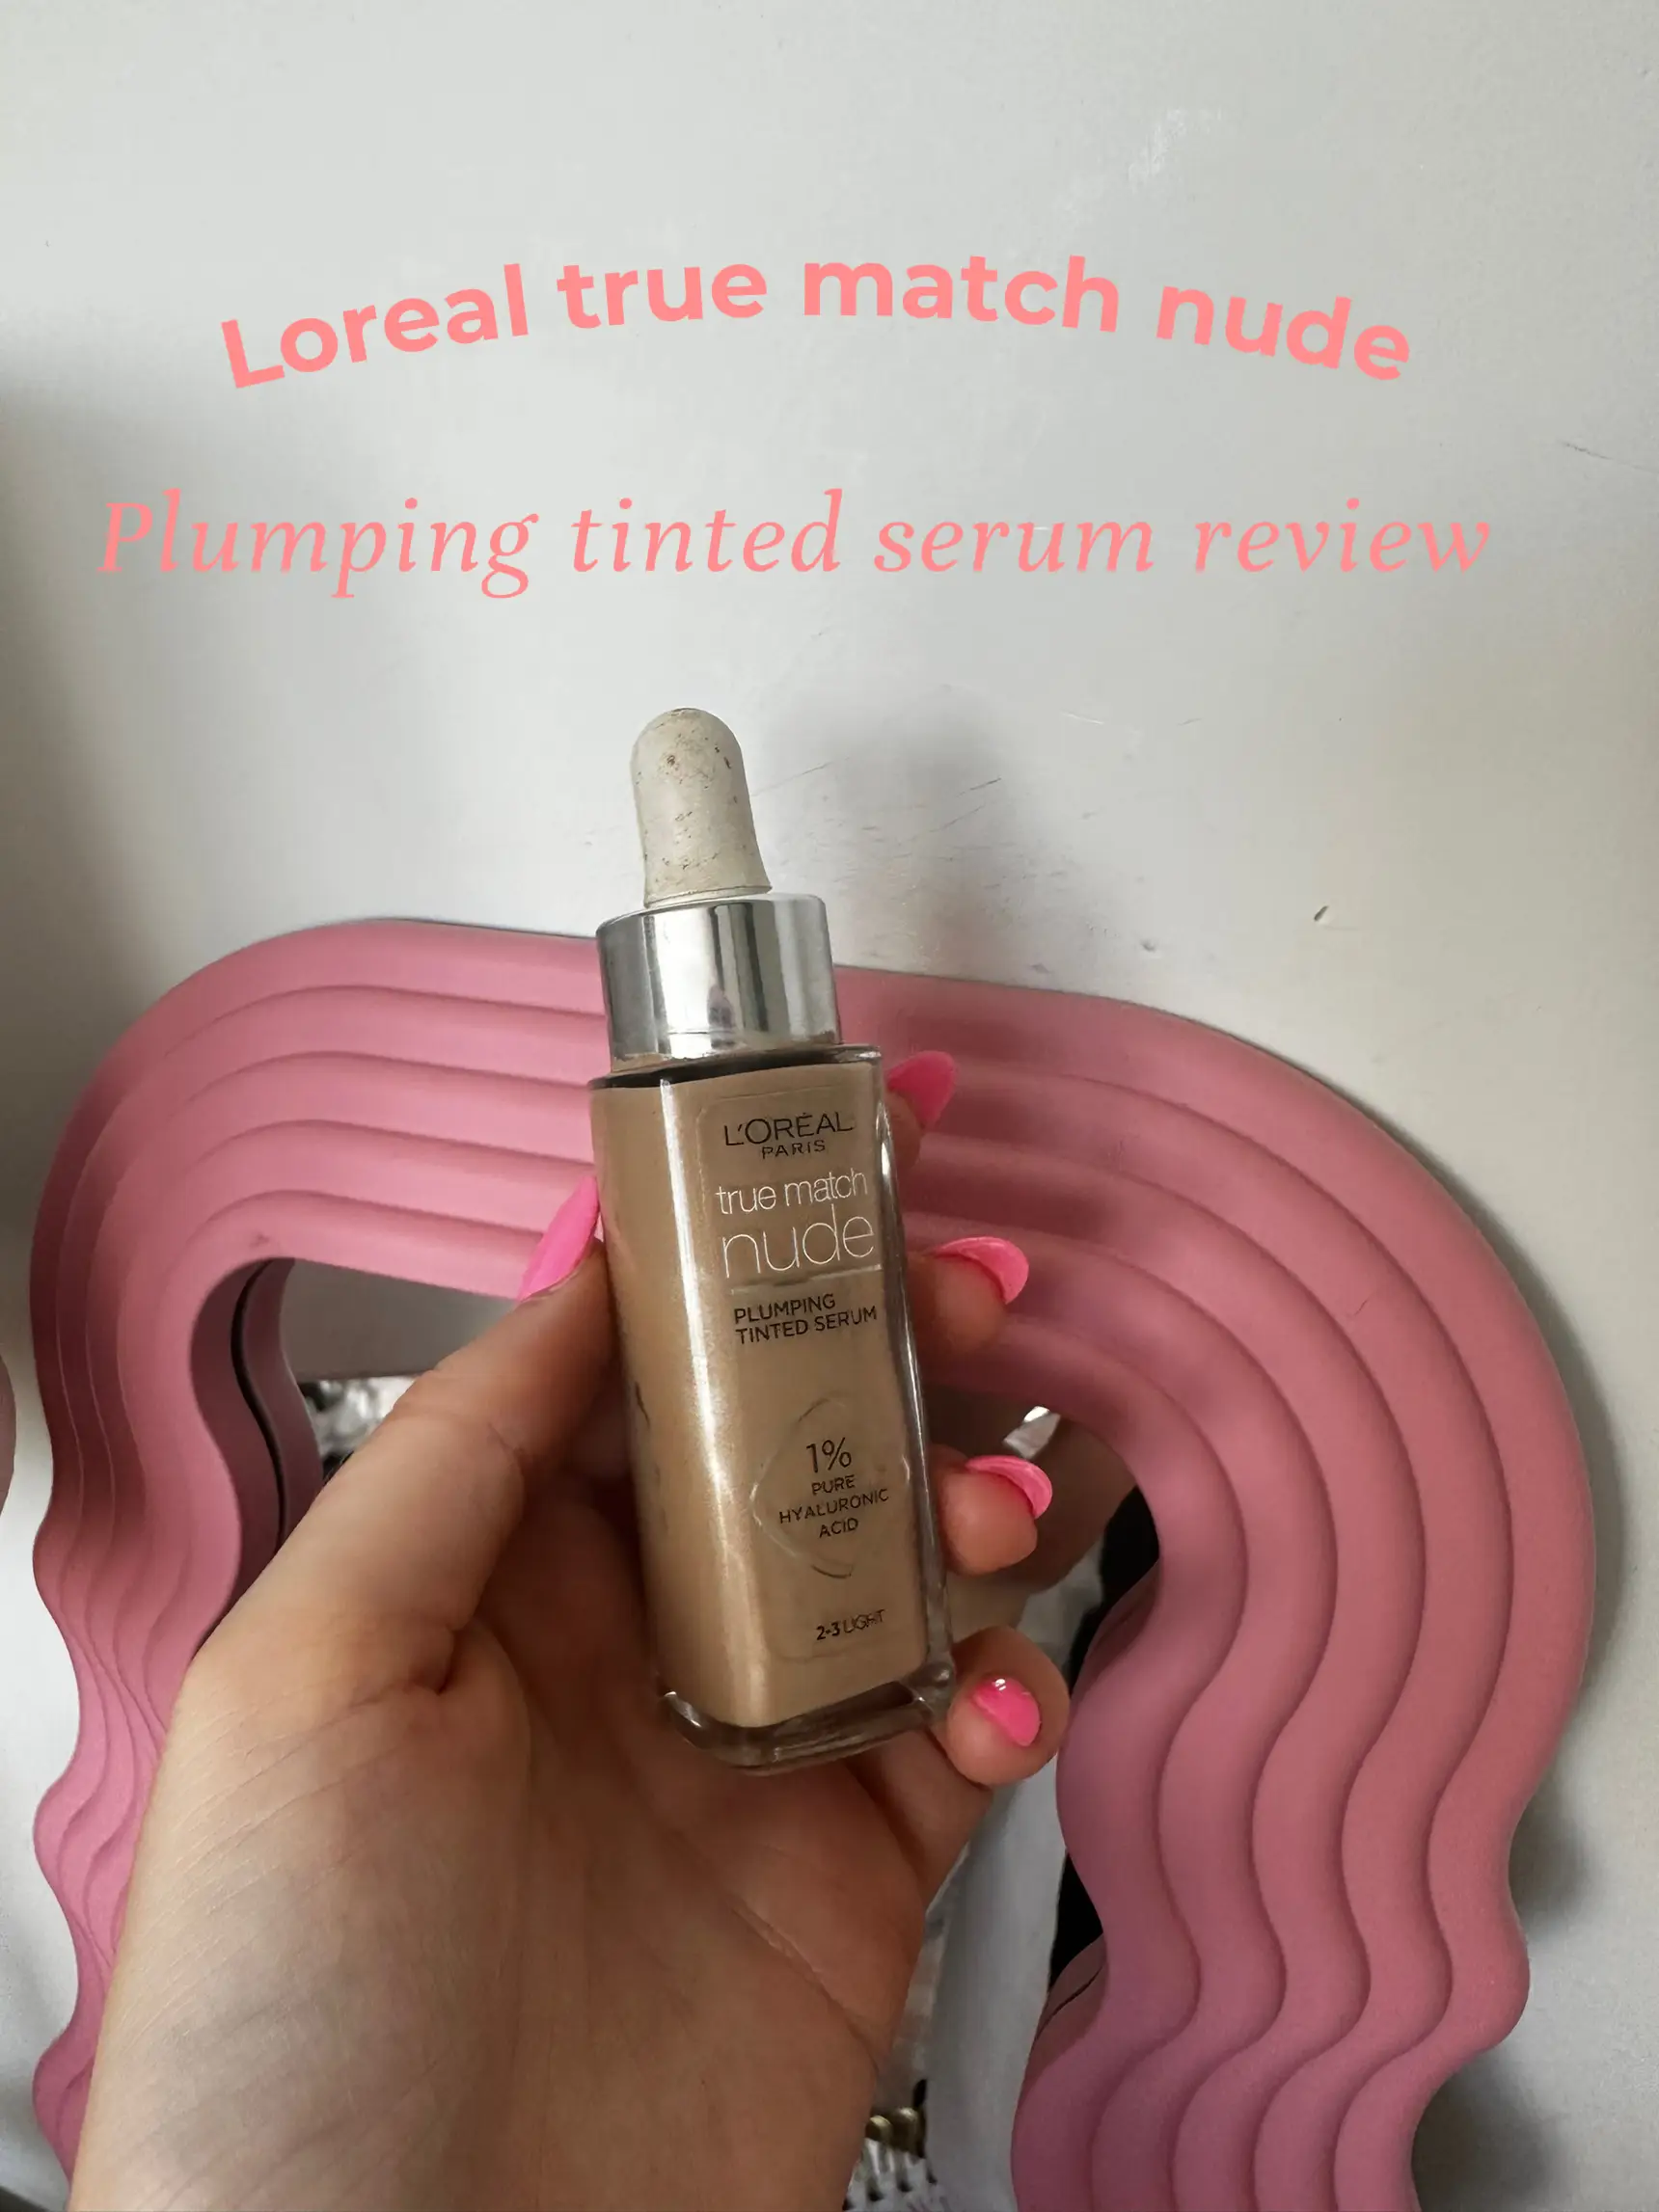 Loreal true match plumping tinted serum review ✨🤍, Gallery posted by  helenachampion